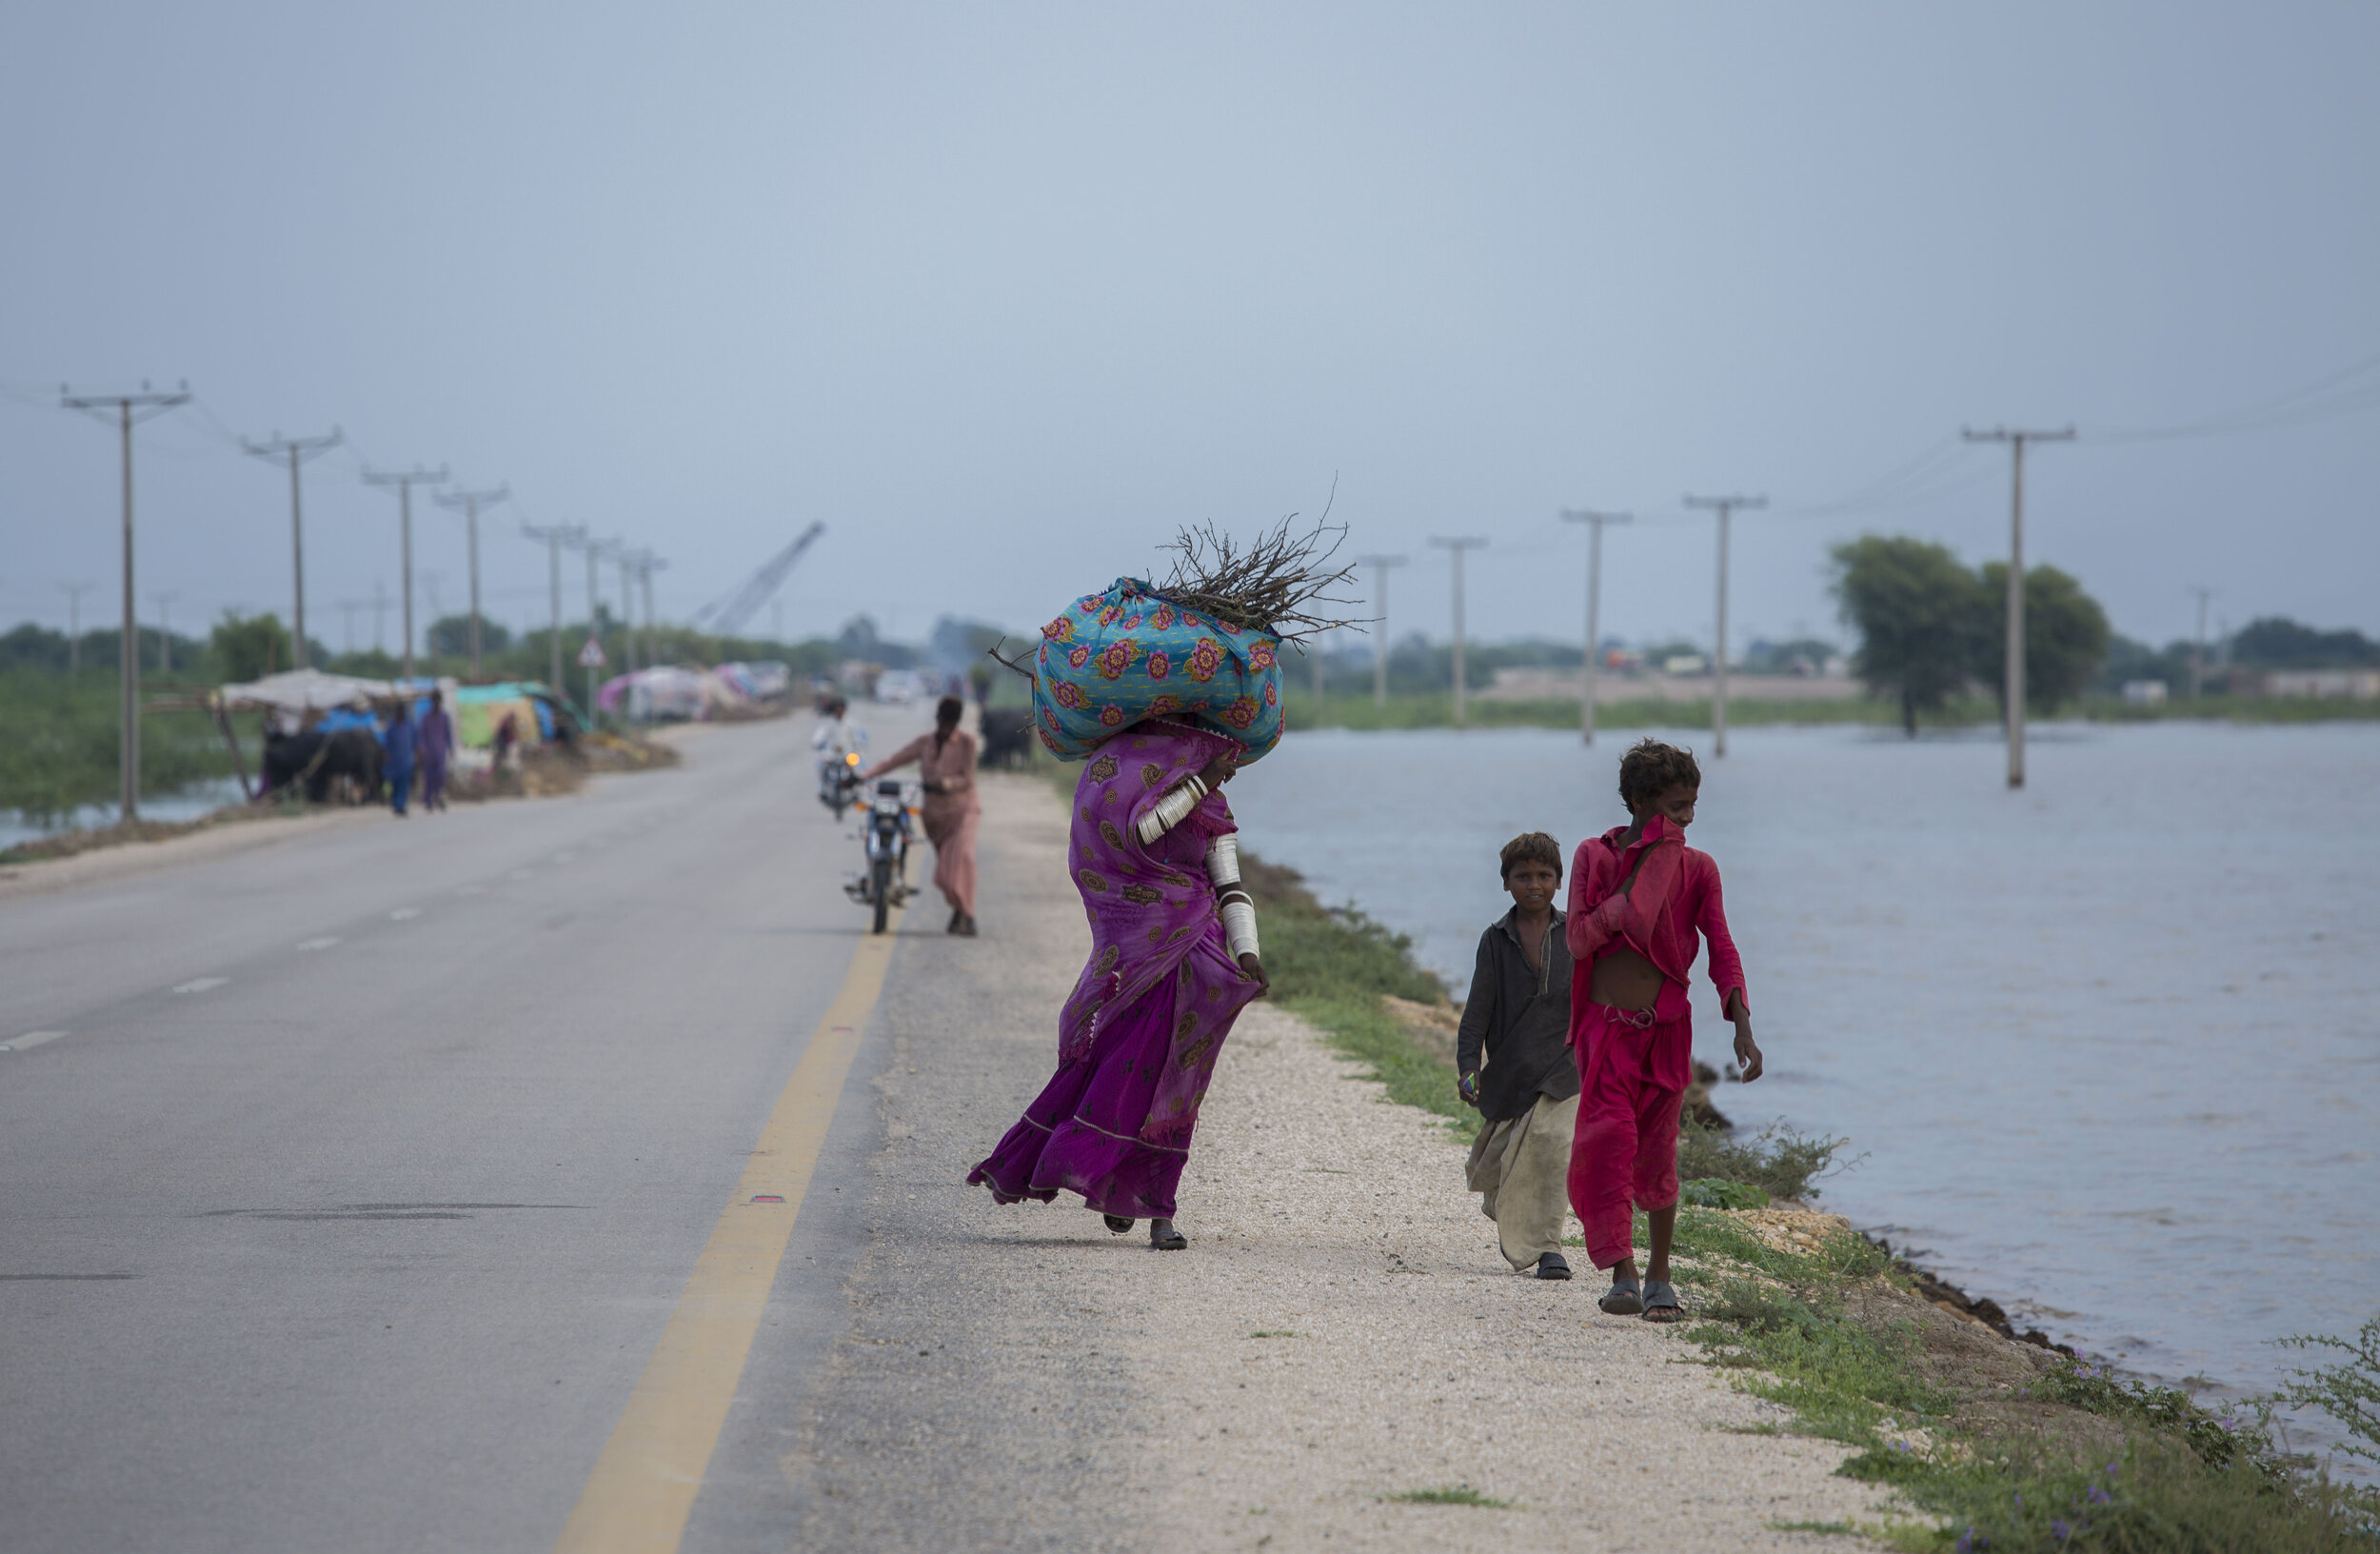  Kanwari walks for miles along with her children carrying wood for cooking as they remain homeless. 